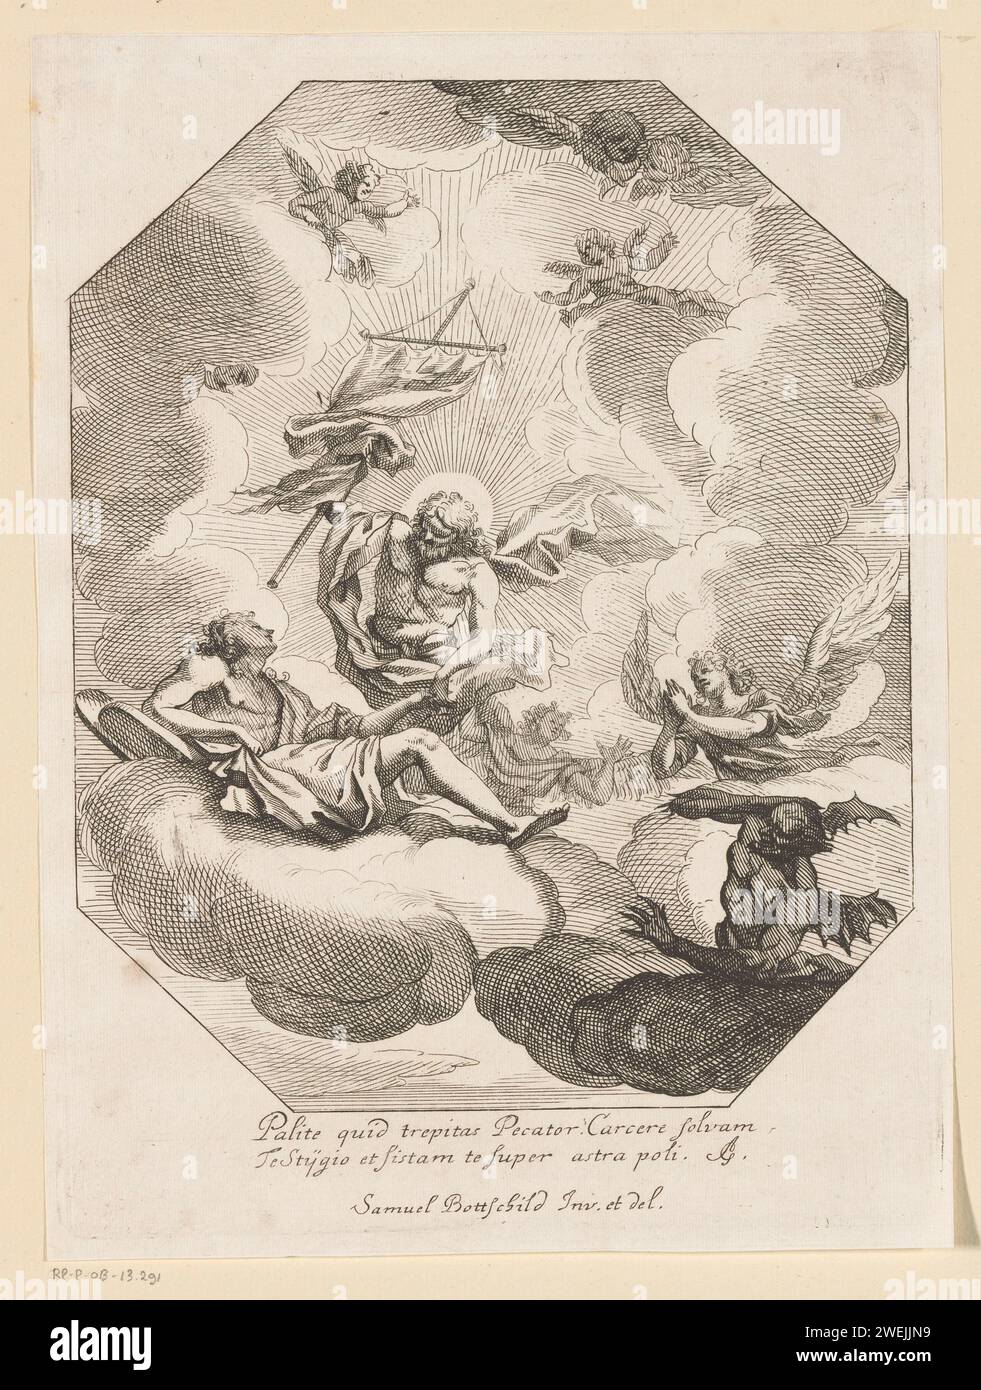 Christ as Savior, Samuel Bottschild, 1693 print   paper etching Christ. resurrection of the dead  Last Judgement. devil(s) and demons. angels. sitting or standing on clouds Stock Photo